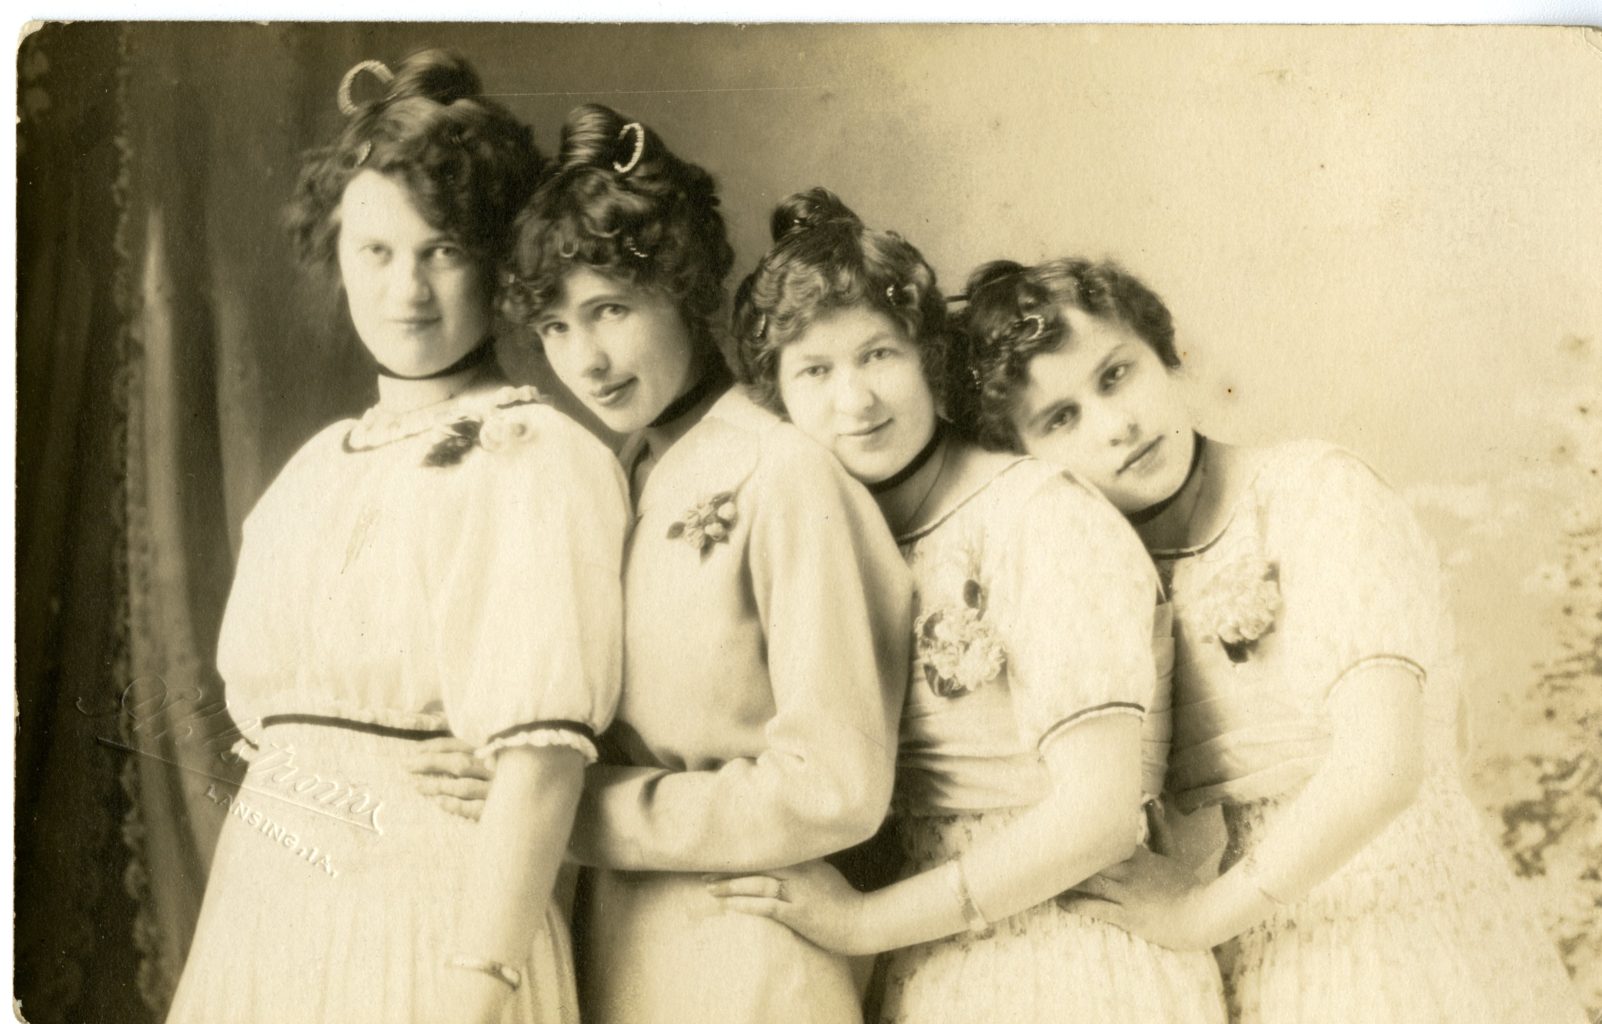 Four girls pose together in the studio.